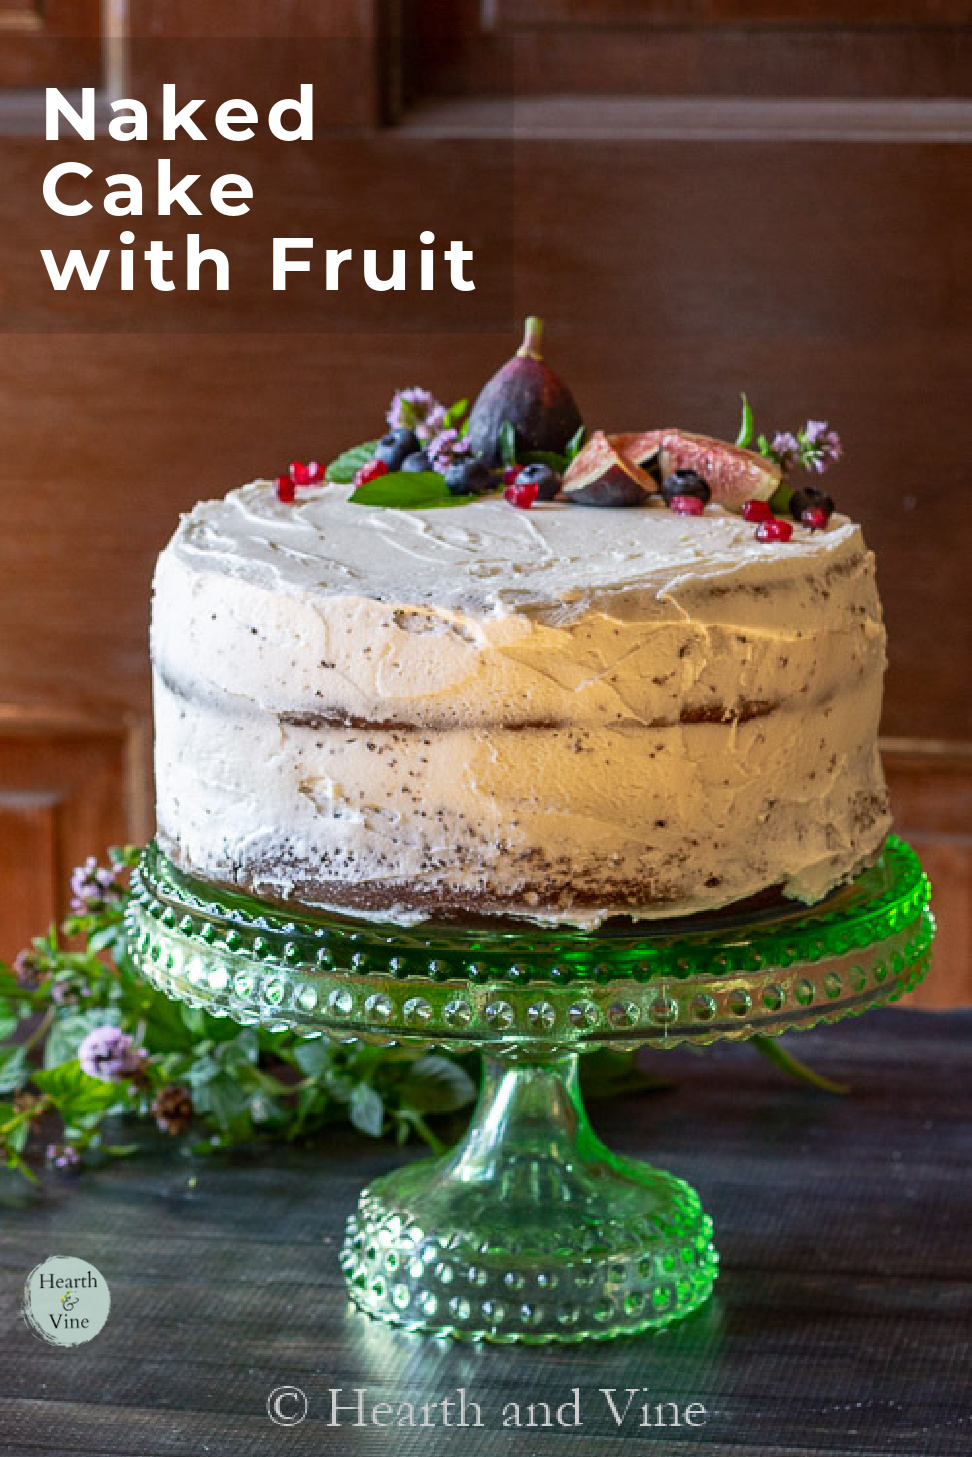 Chocolate naked cake topped with fresh figs, pomegranate seed, mint leaves and mint flowers.